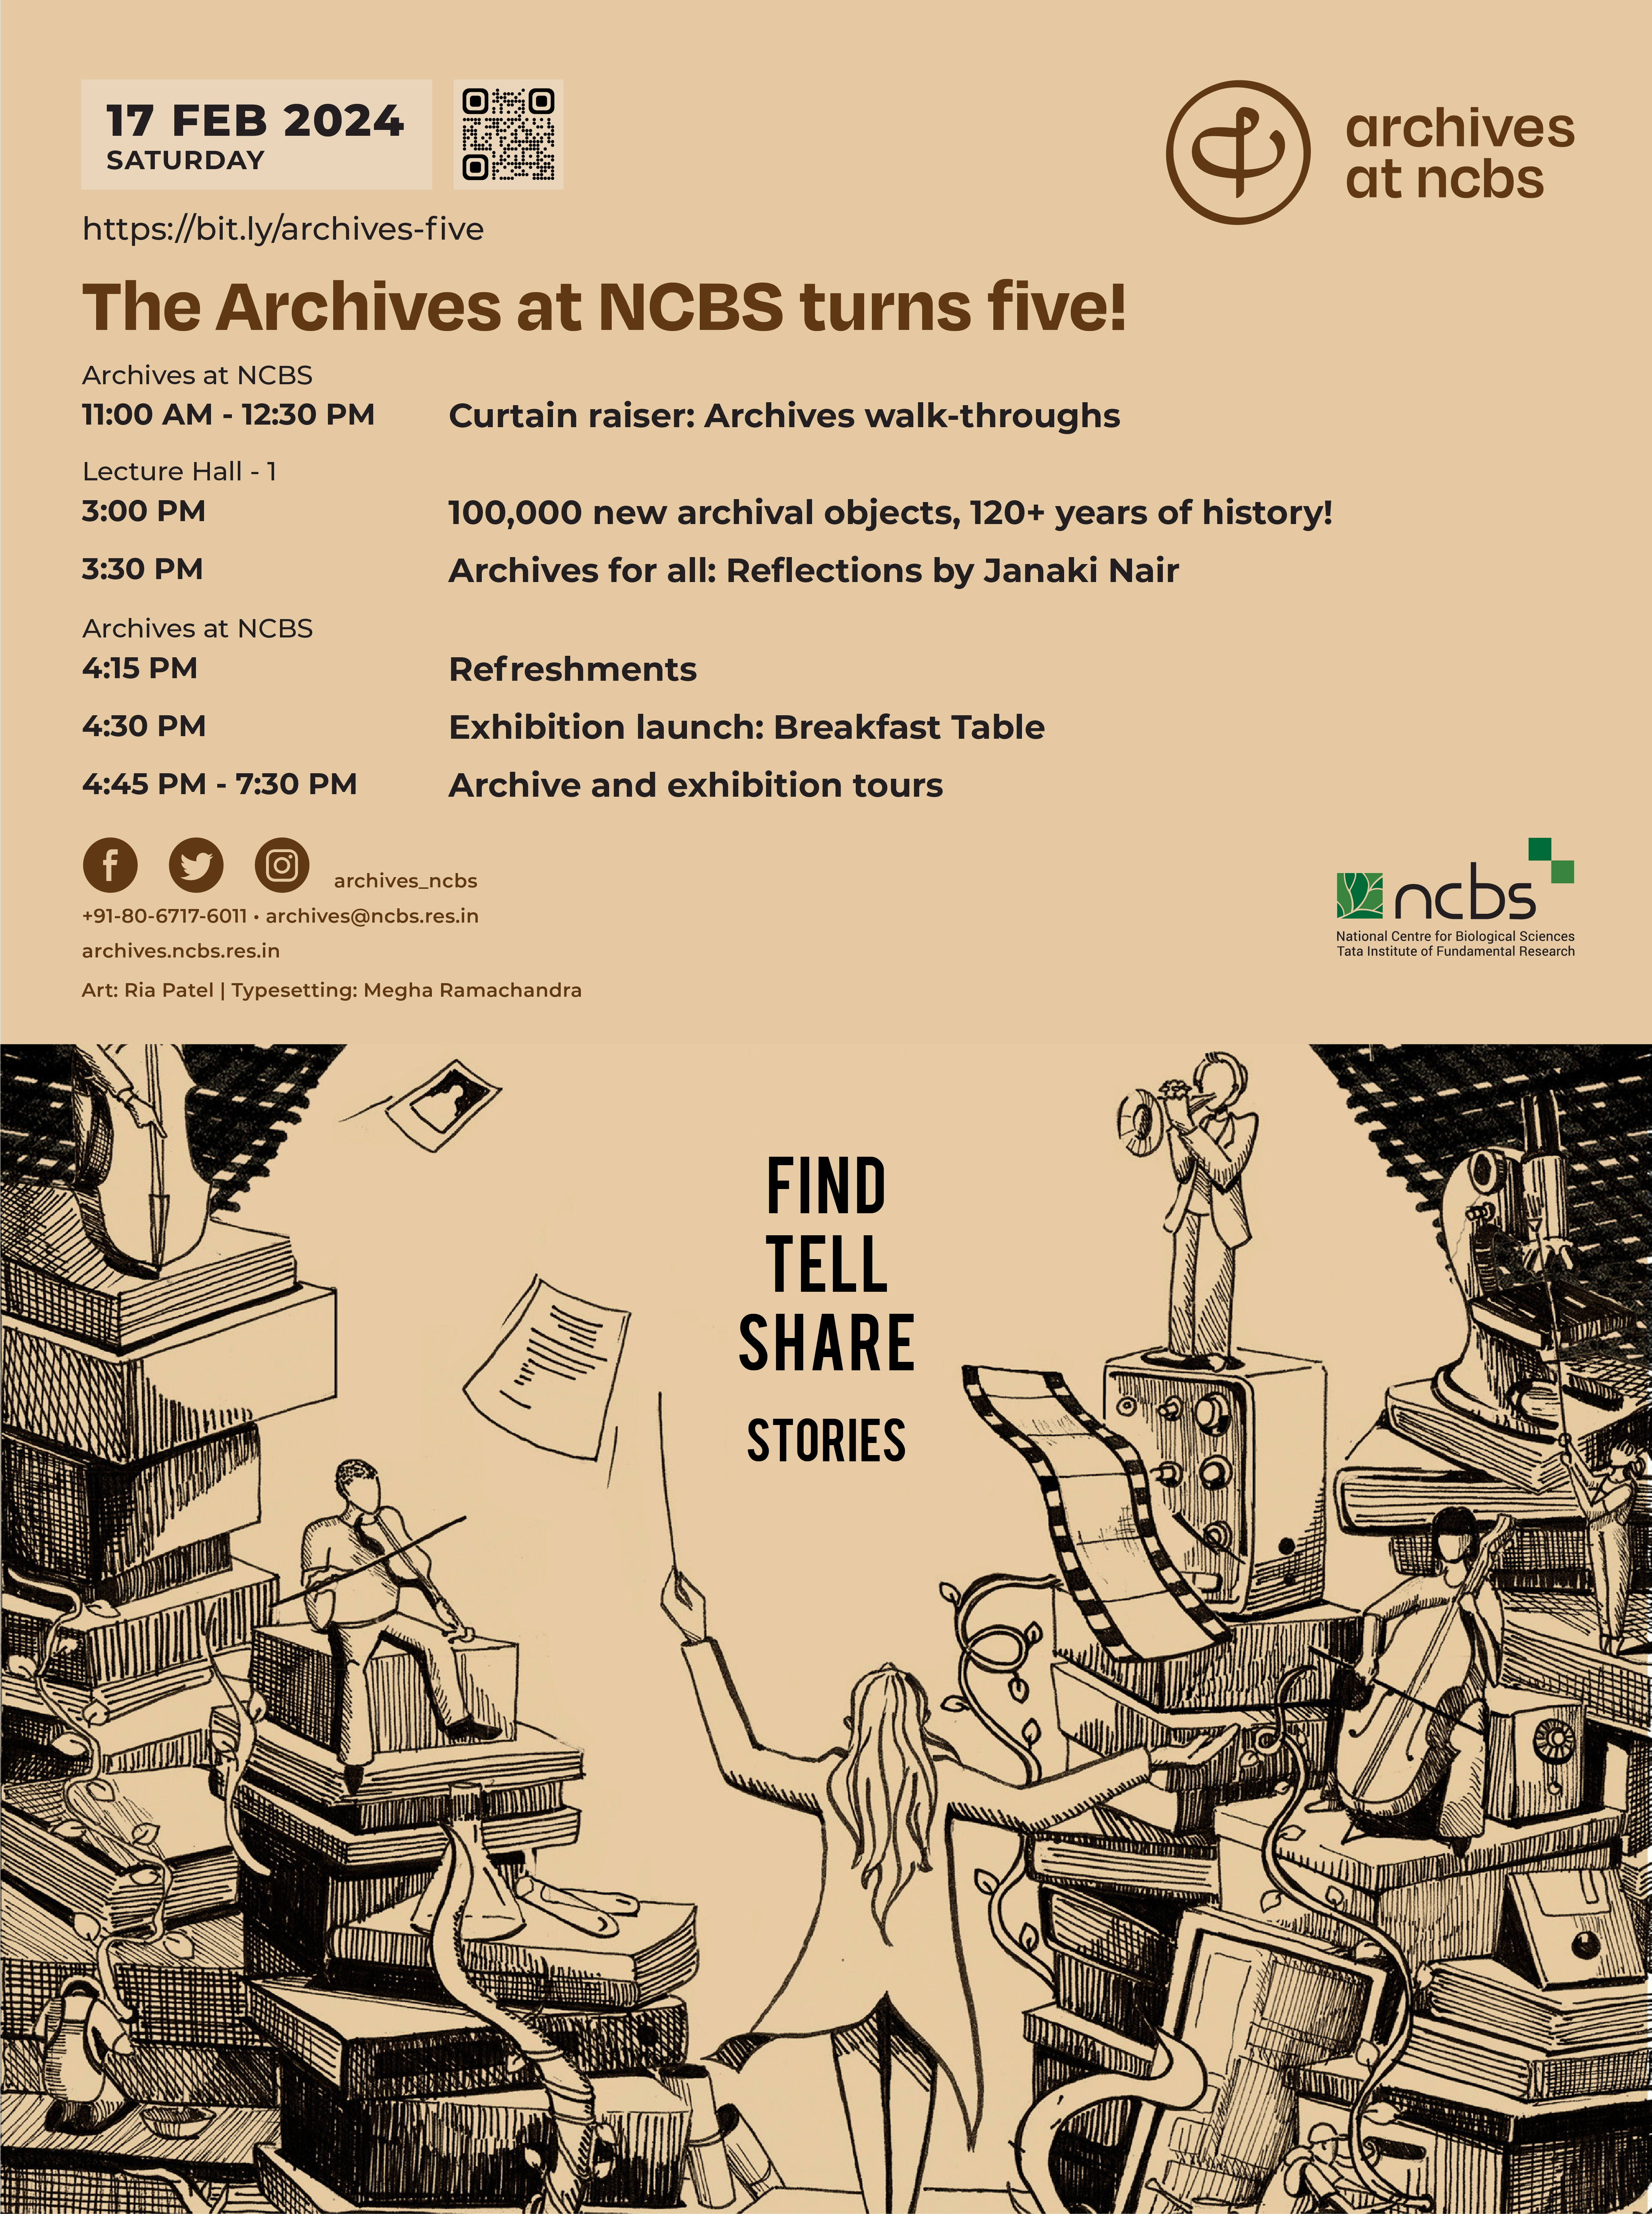 The Archives at NCBS turns five!